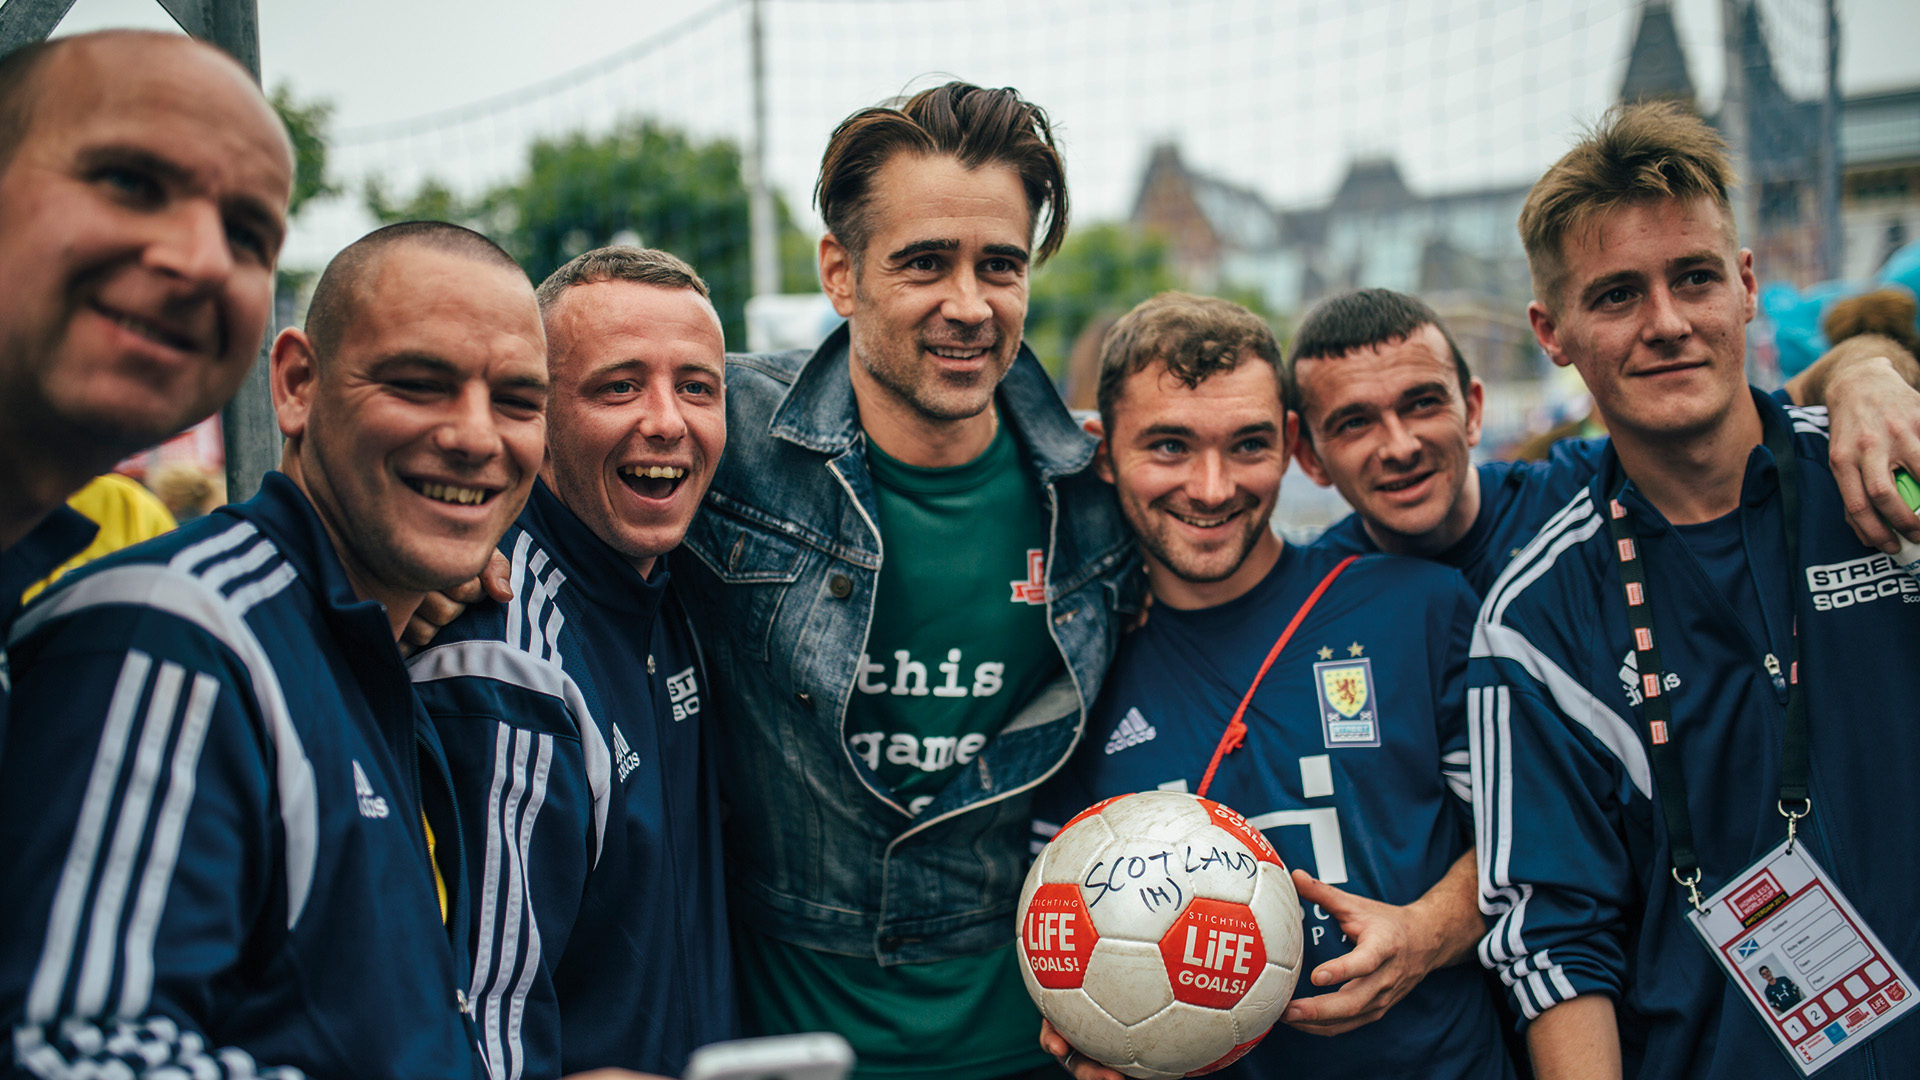 Colin Farrell with the Scottish team, holding a football